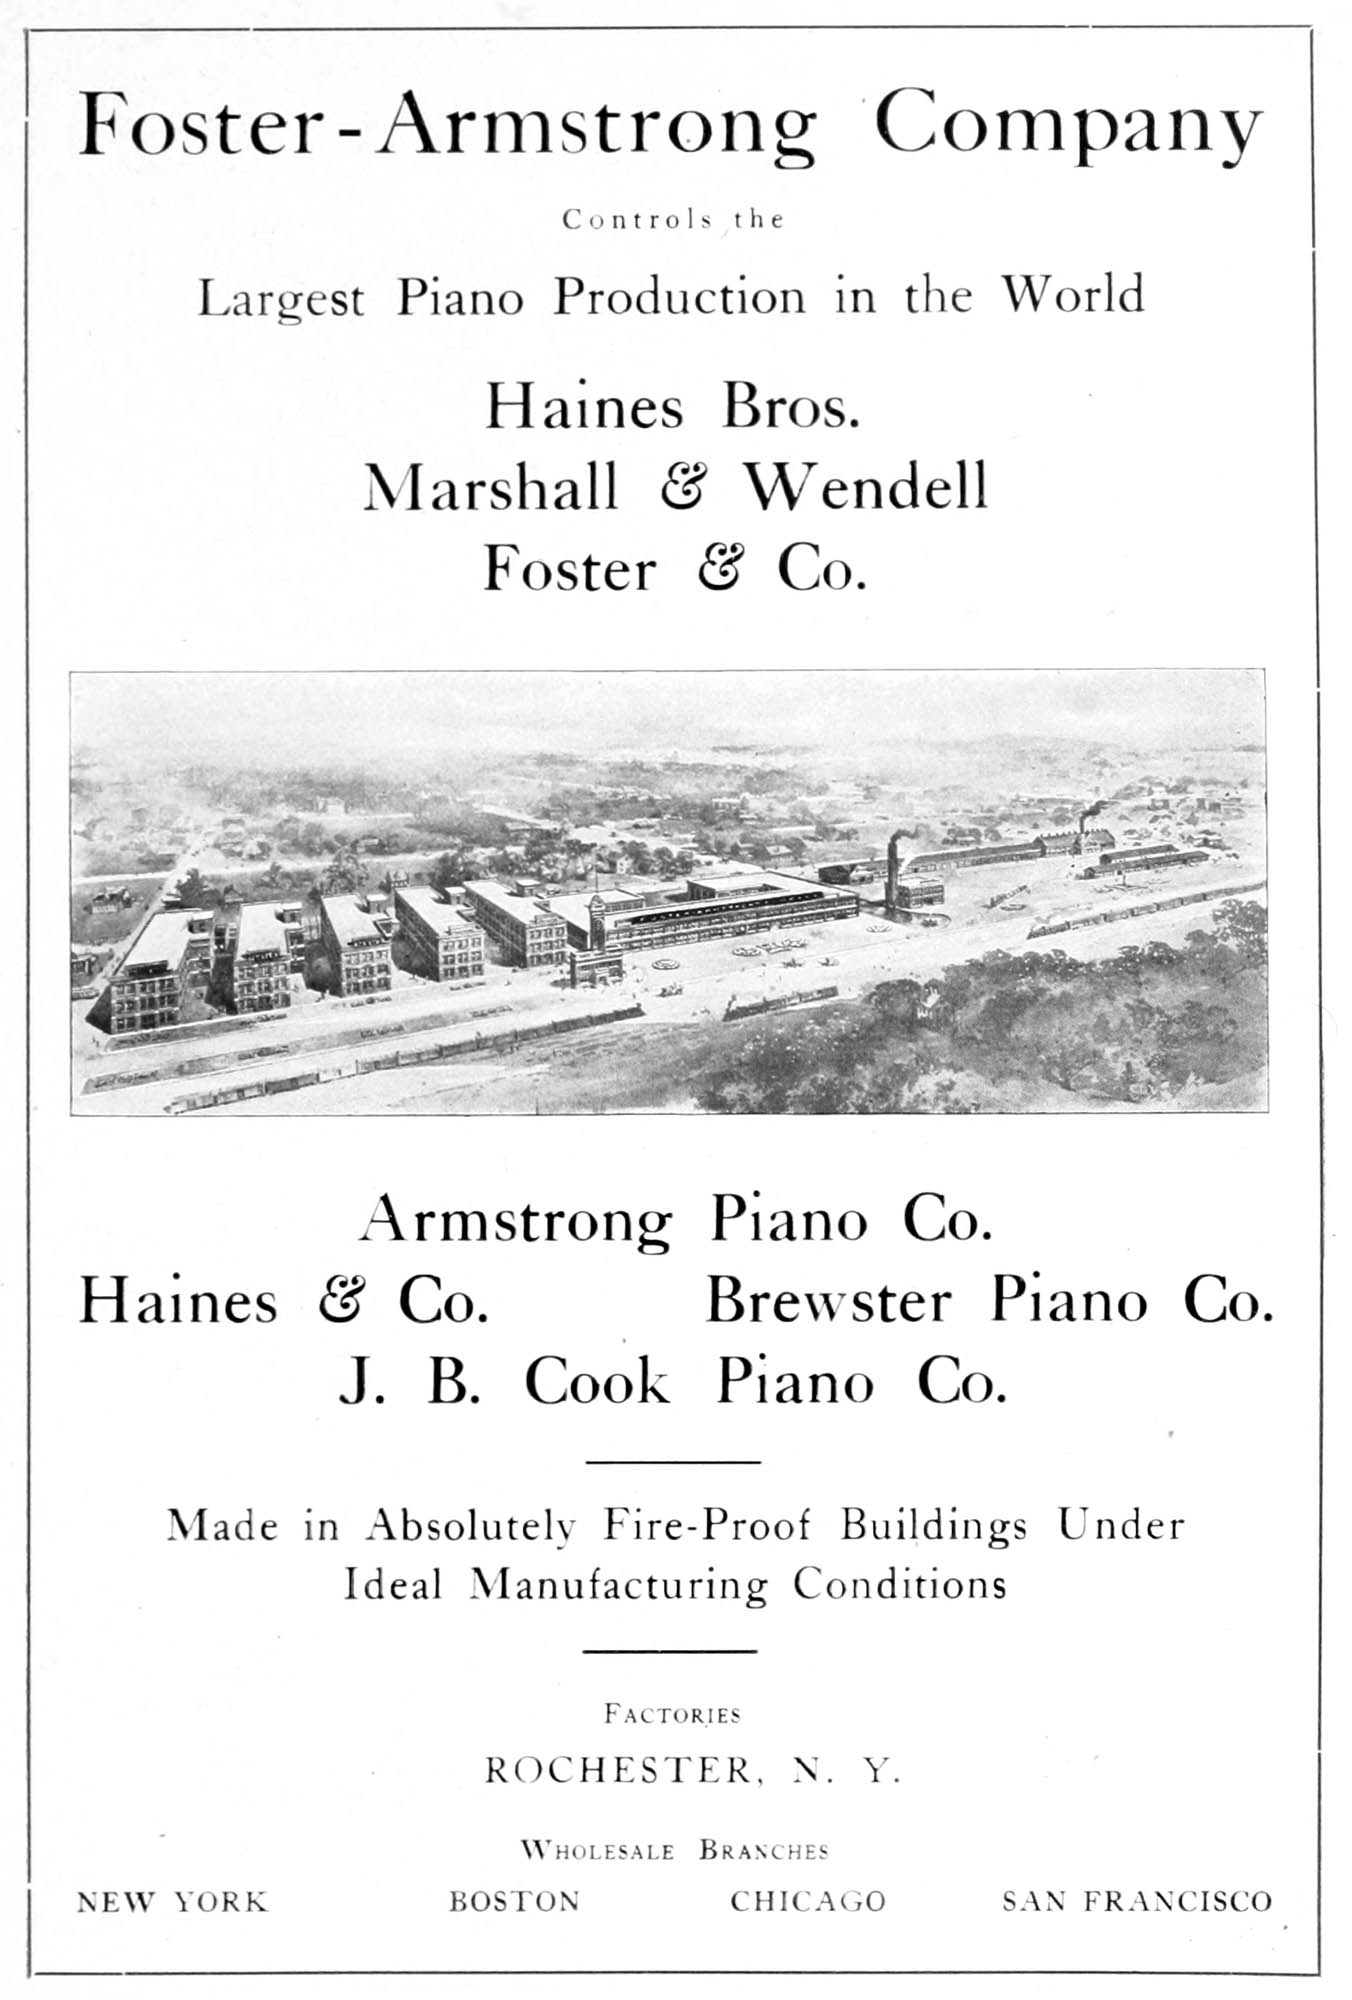 Foster-Armstrong Co. - Pianos, East Rochester